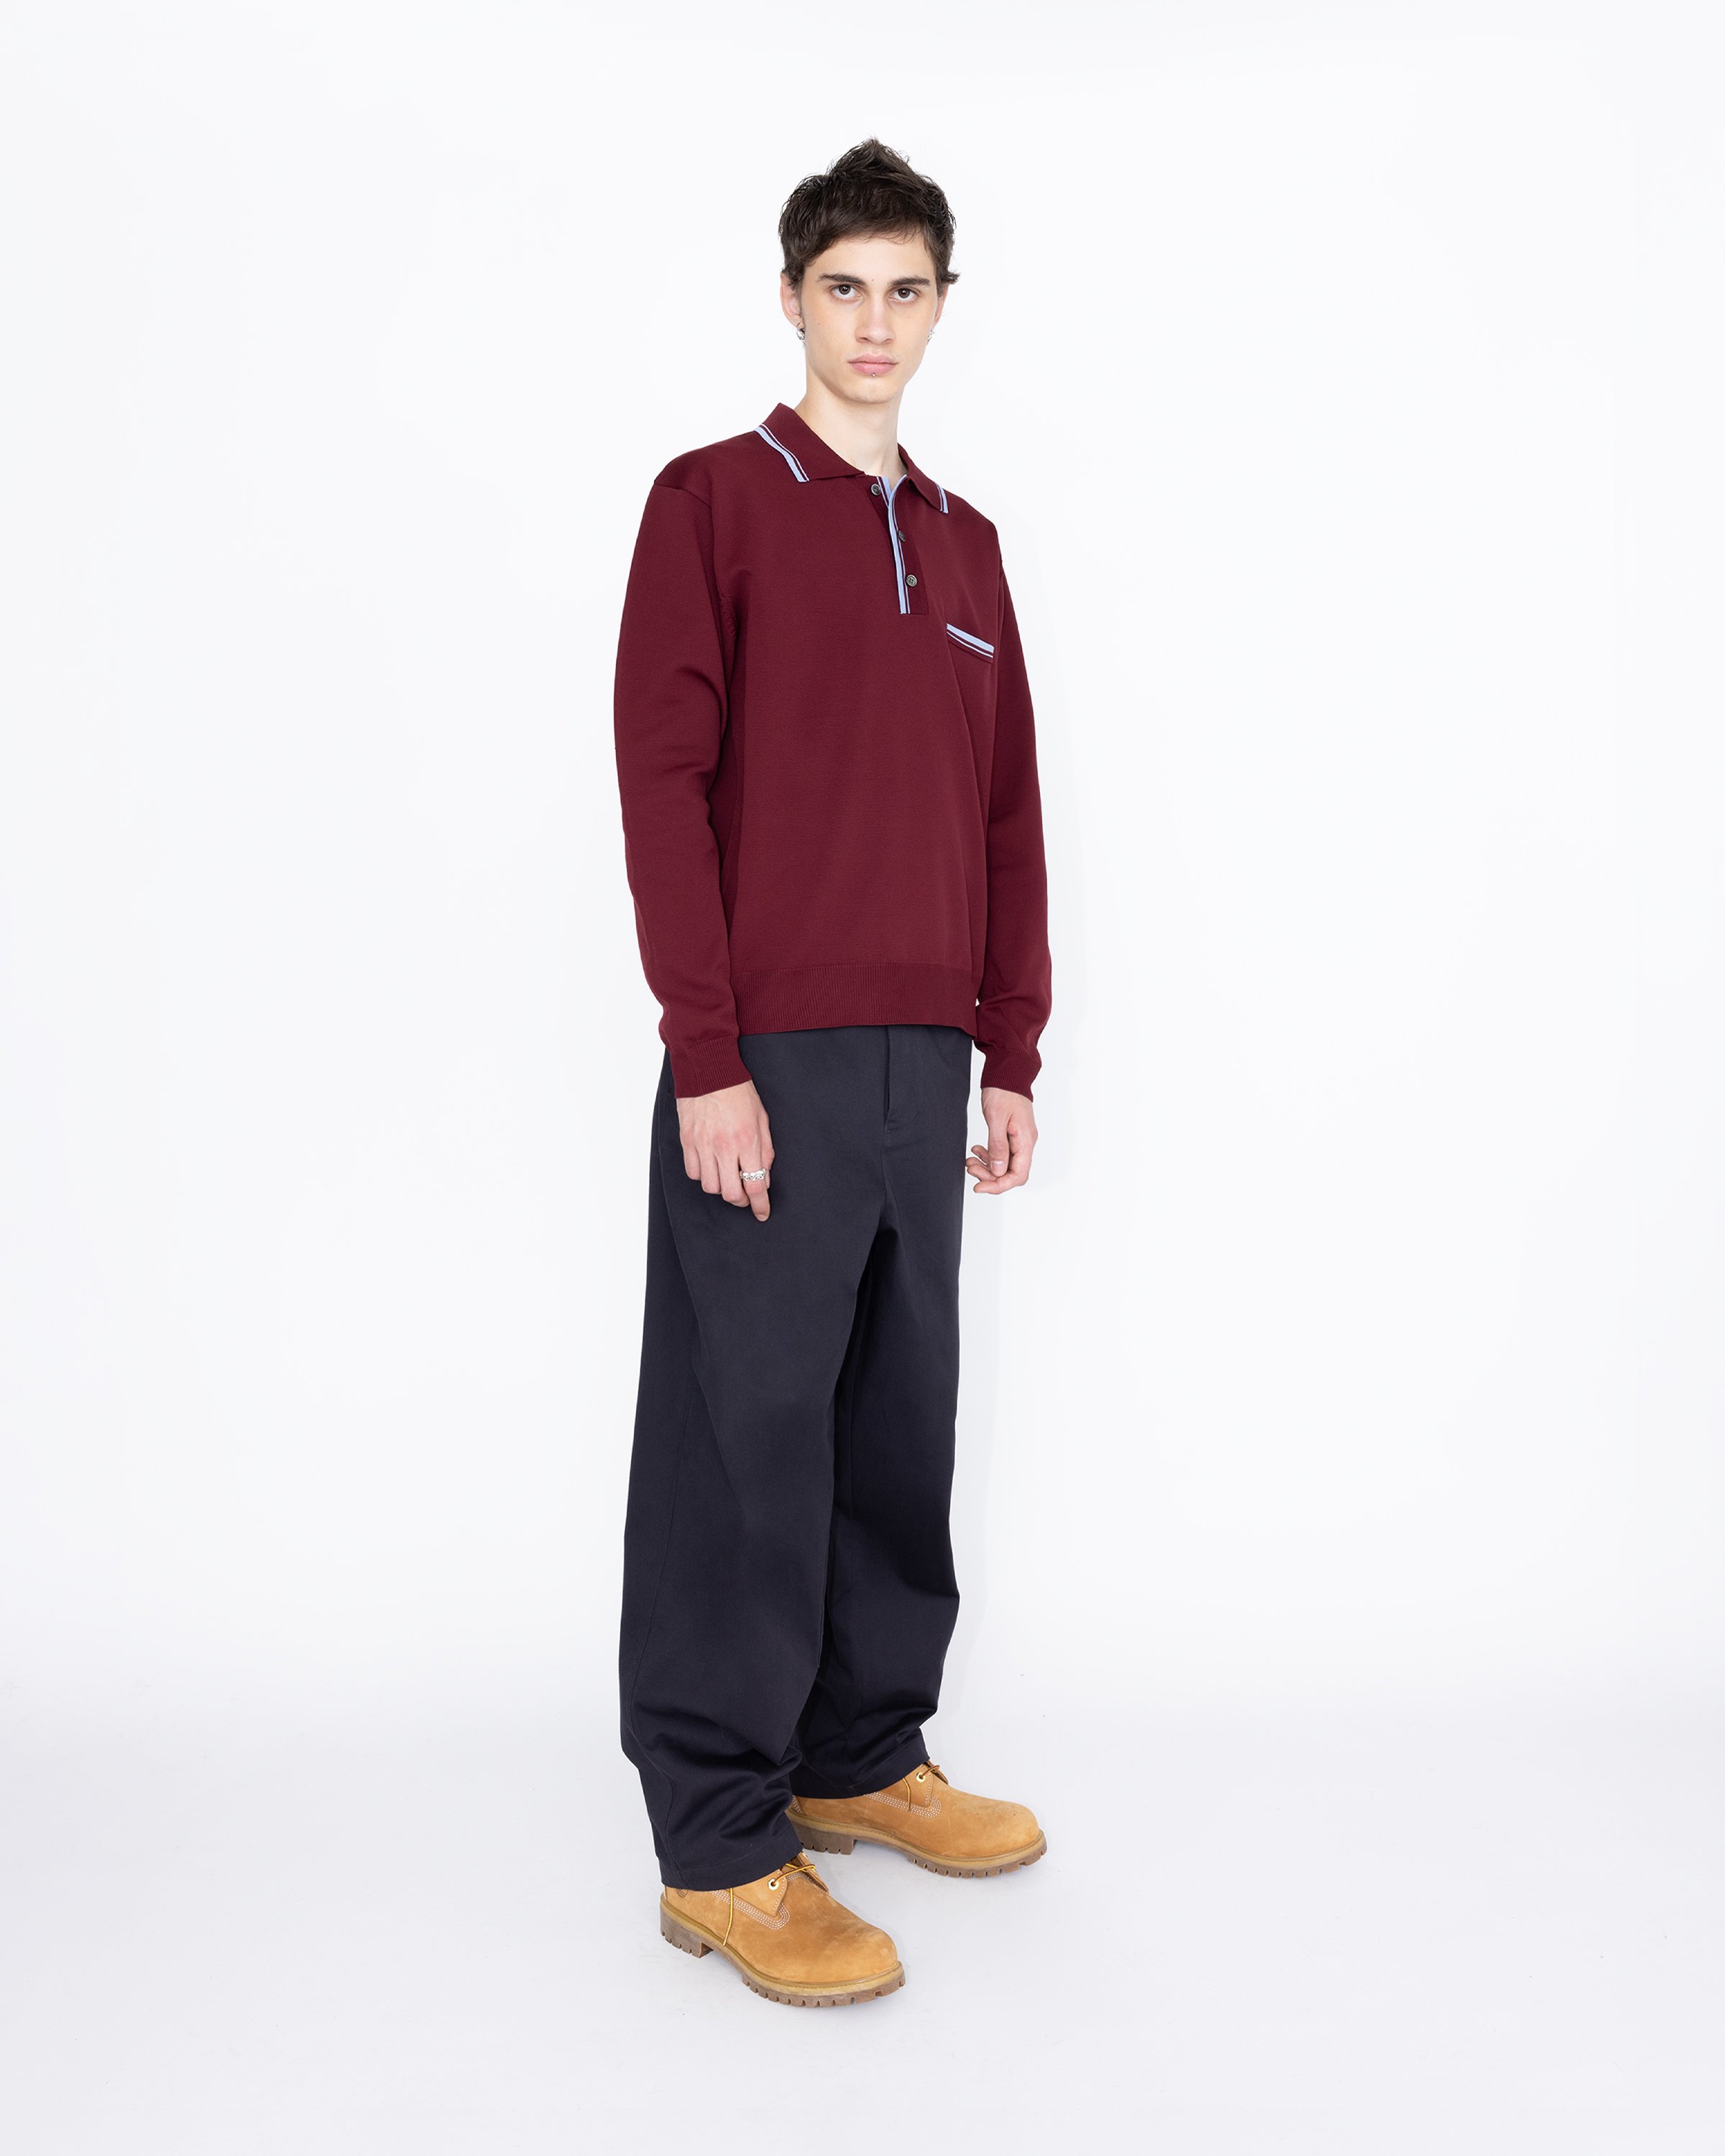 Highsnobiety HS05 - Long Sleeves Knit Polo Bordeaux - Clothing - Red - Image 4